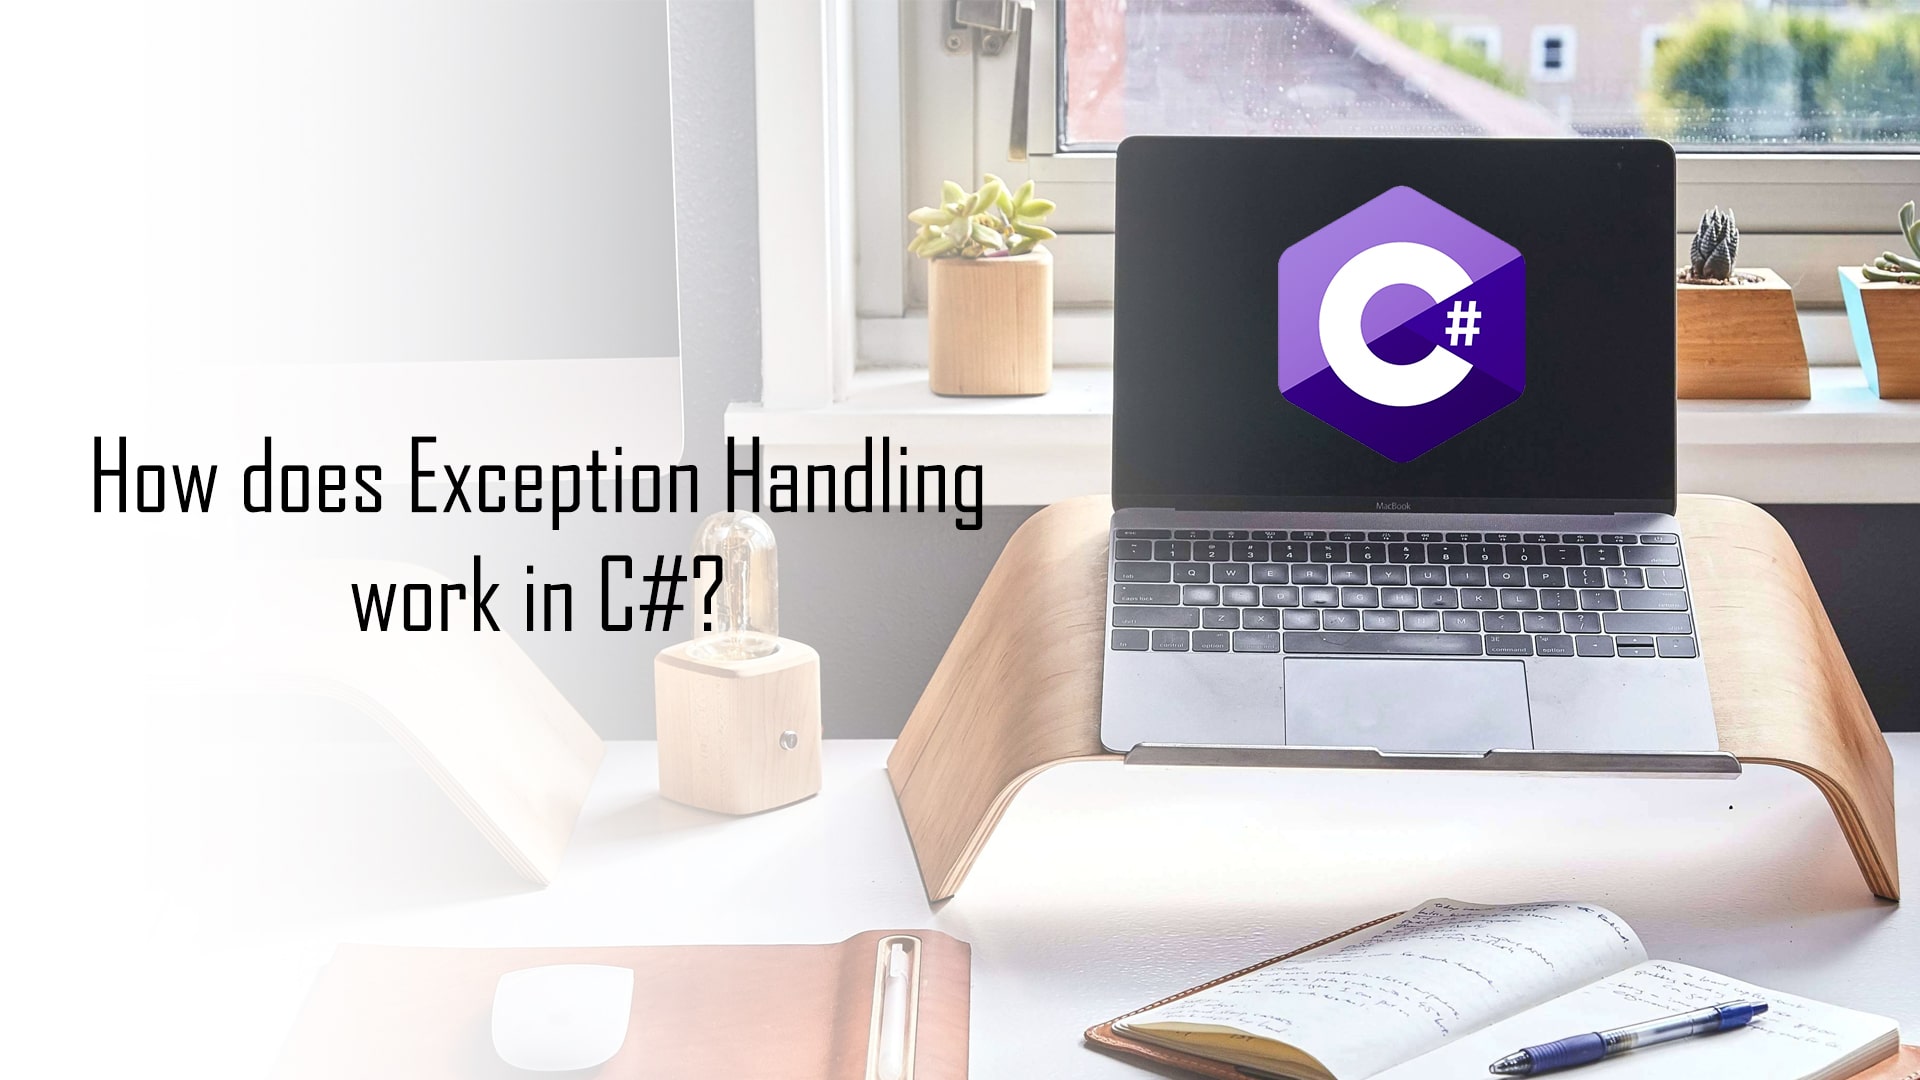 A Deep Dive into C# Errors or Exceptions Handling